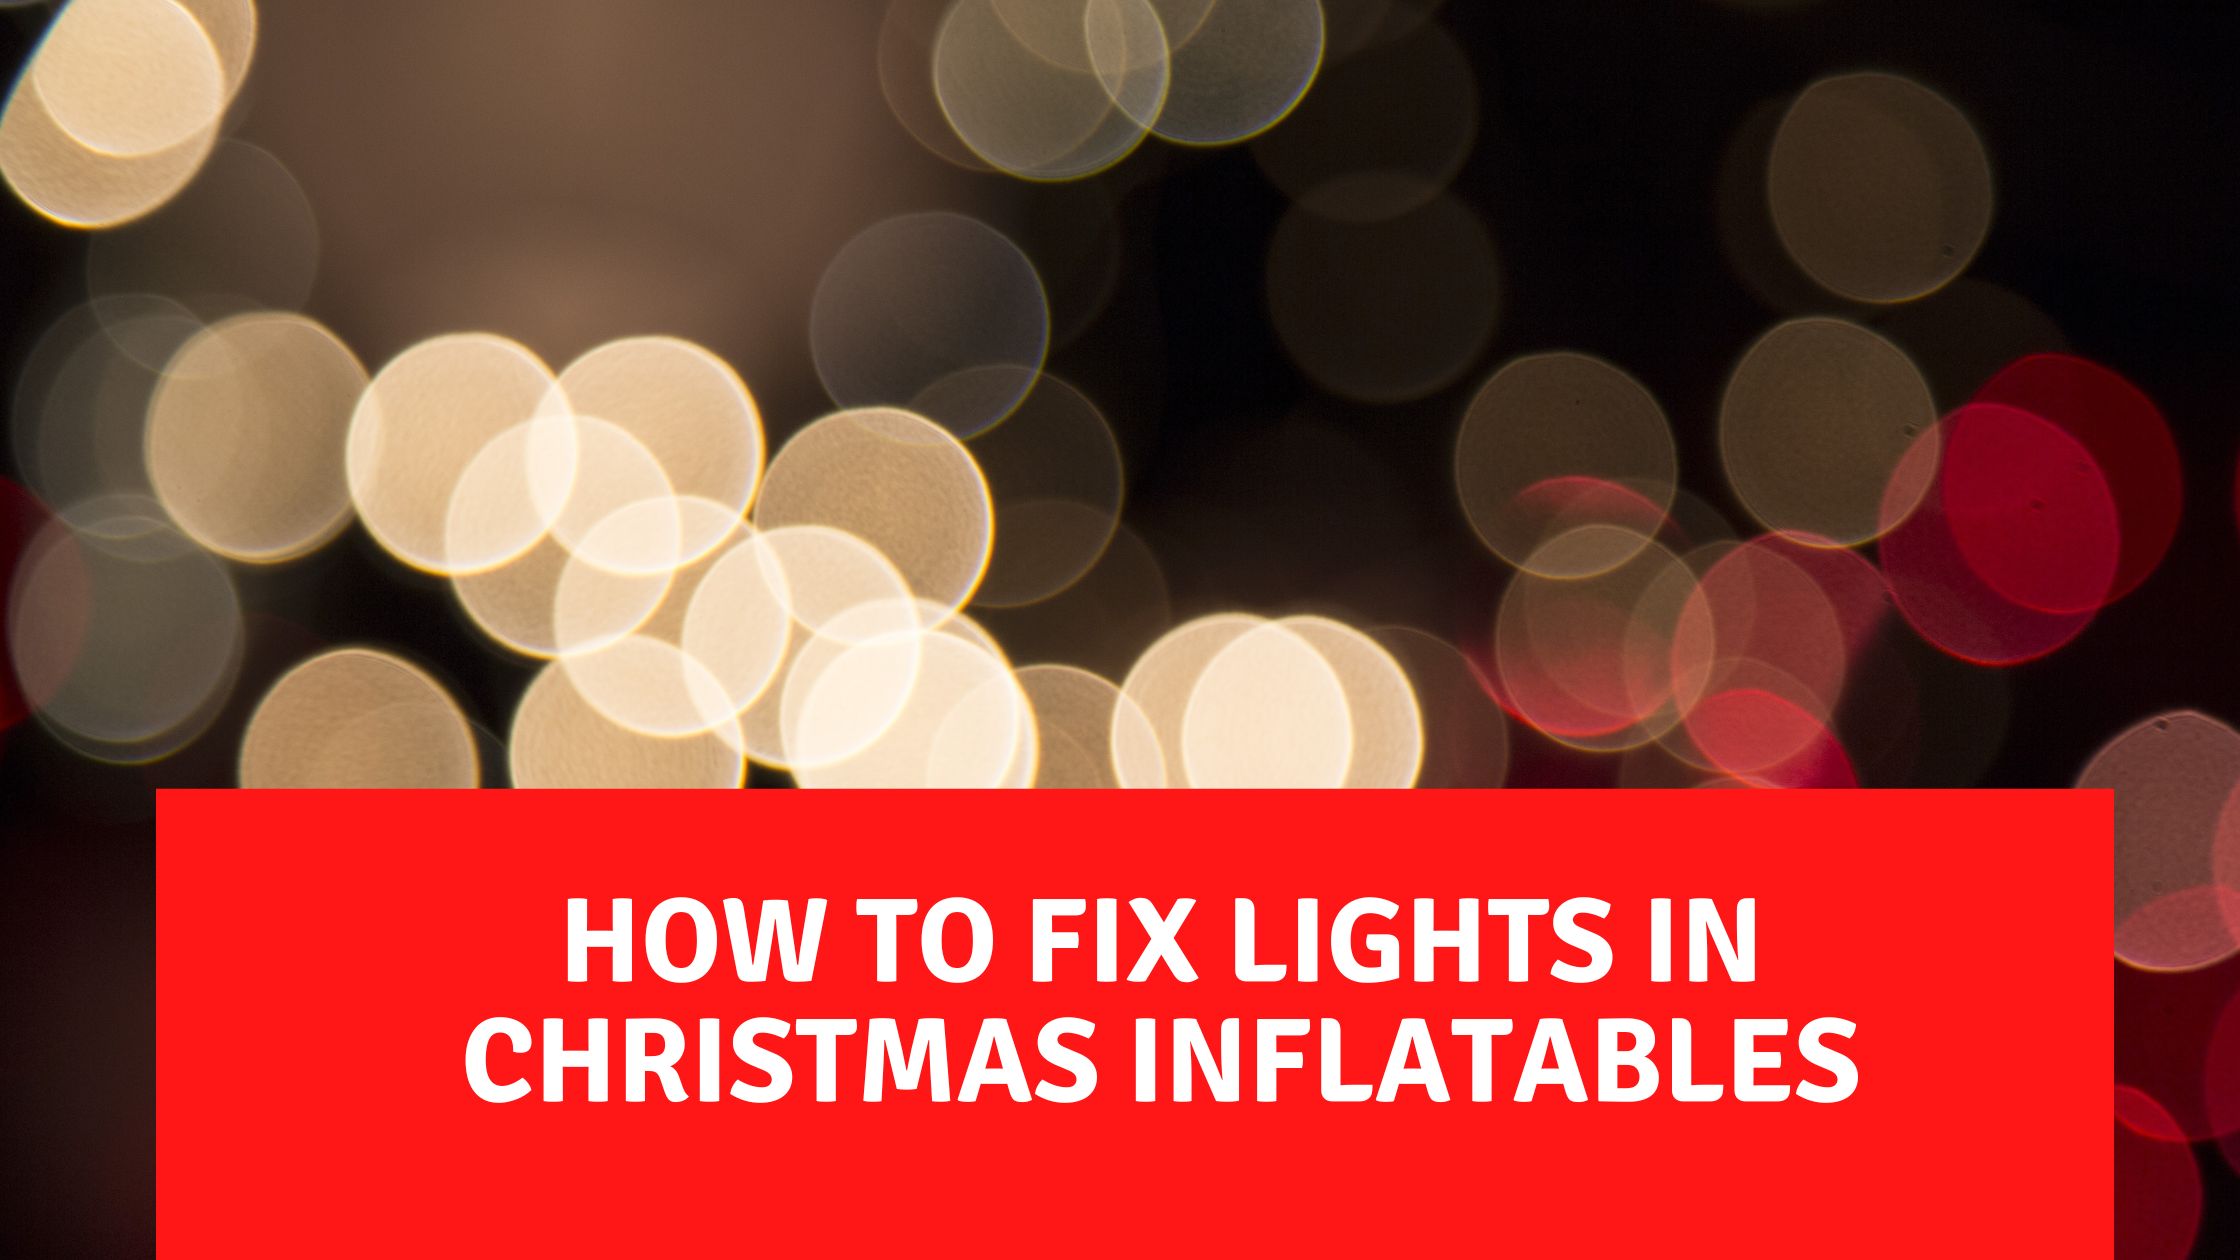 How to fix lights in christmas inflatables: A step-by-step guide